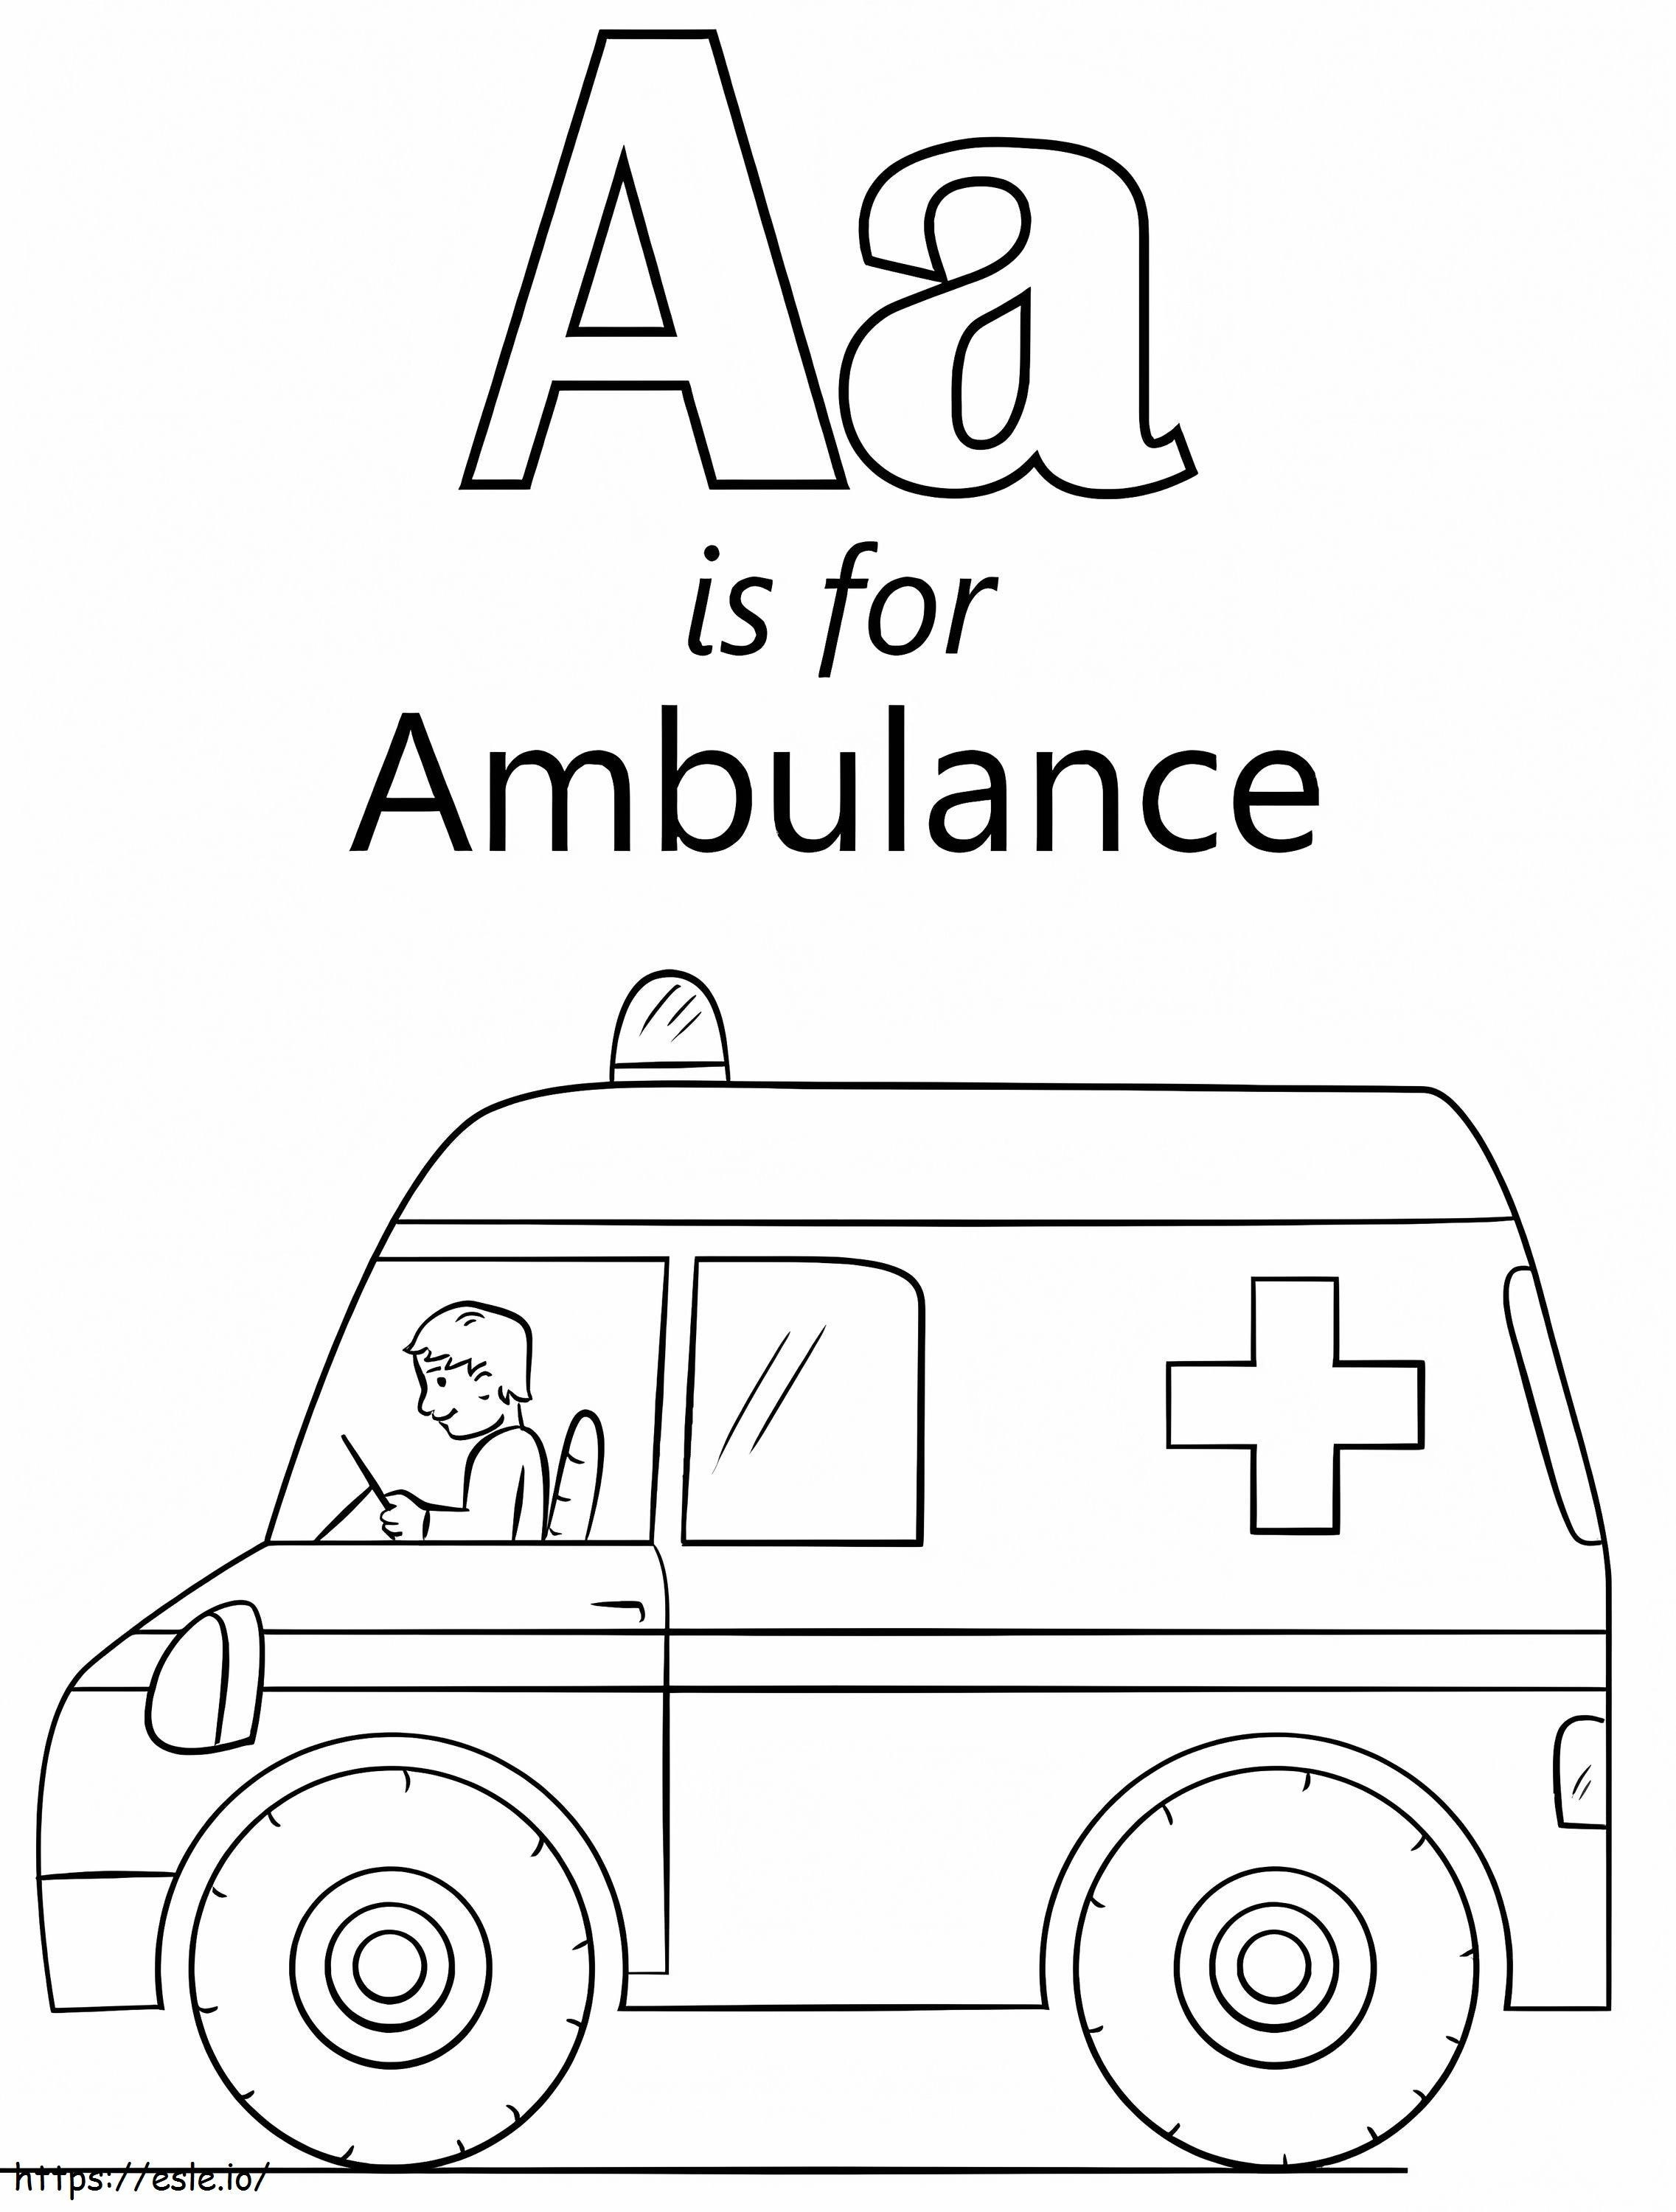 Ambulance Letter A coloring page